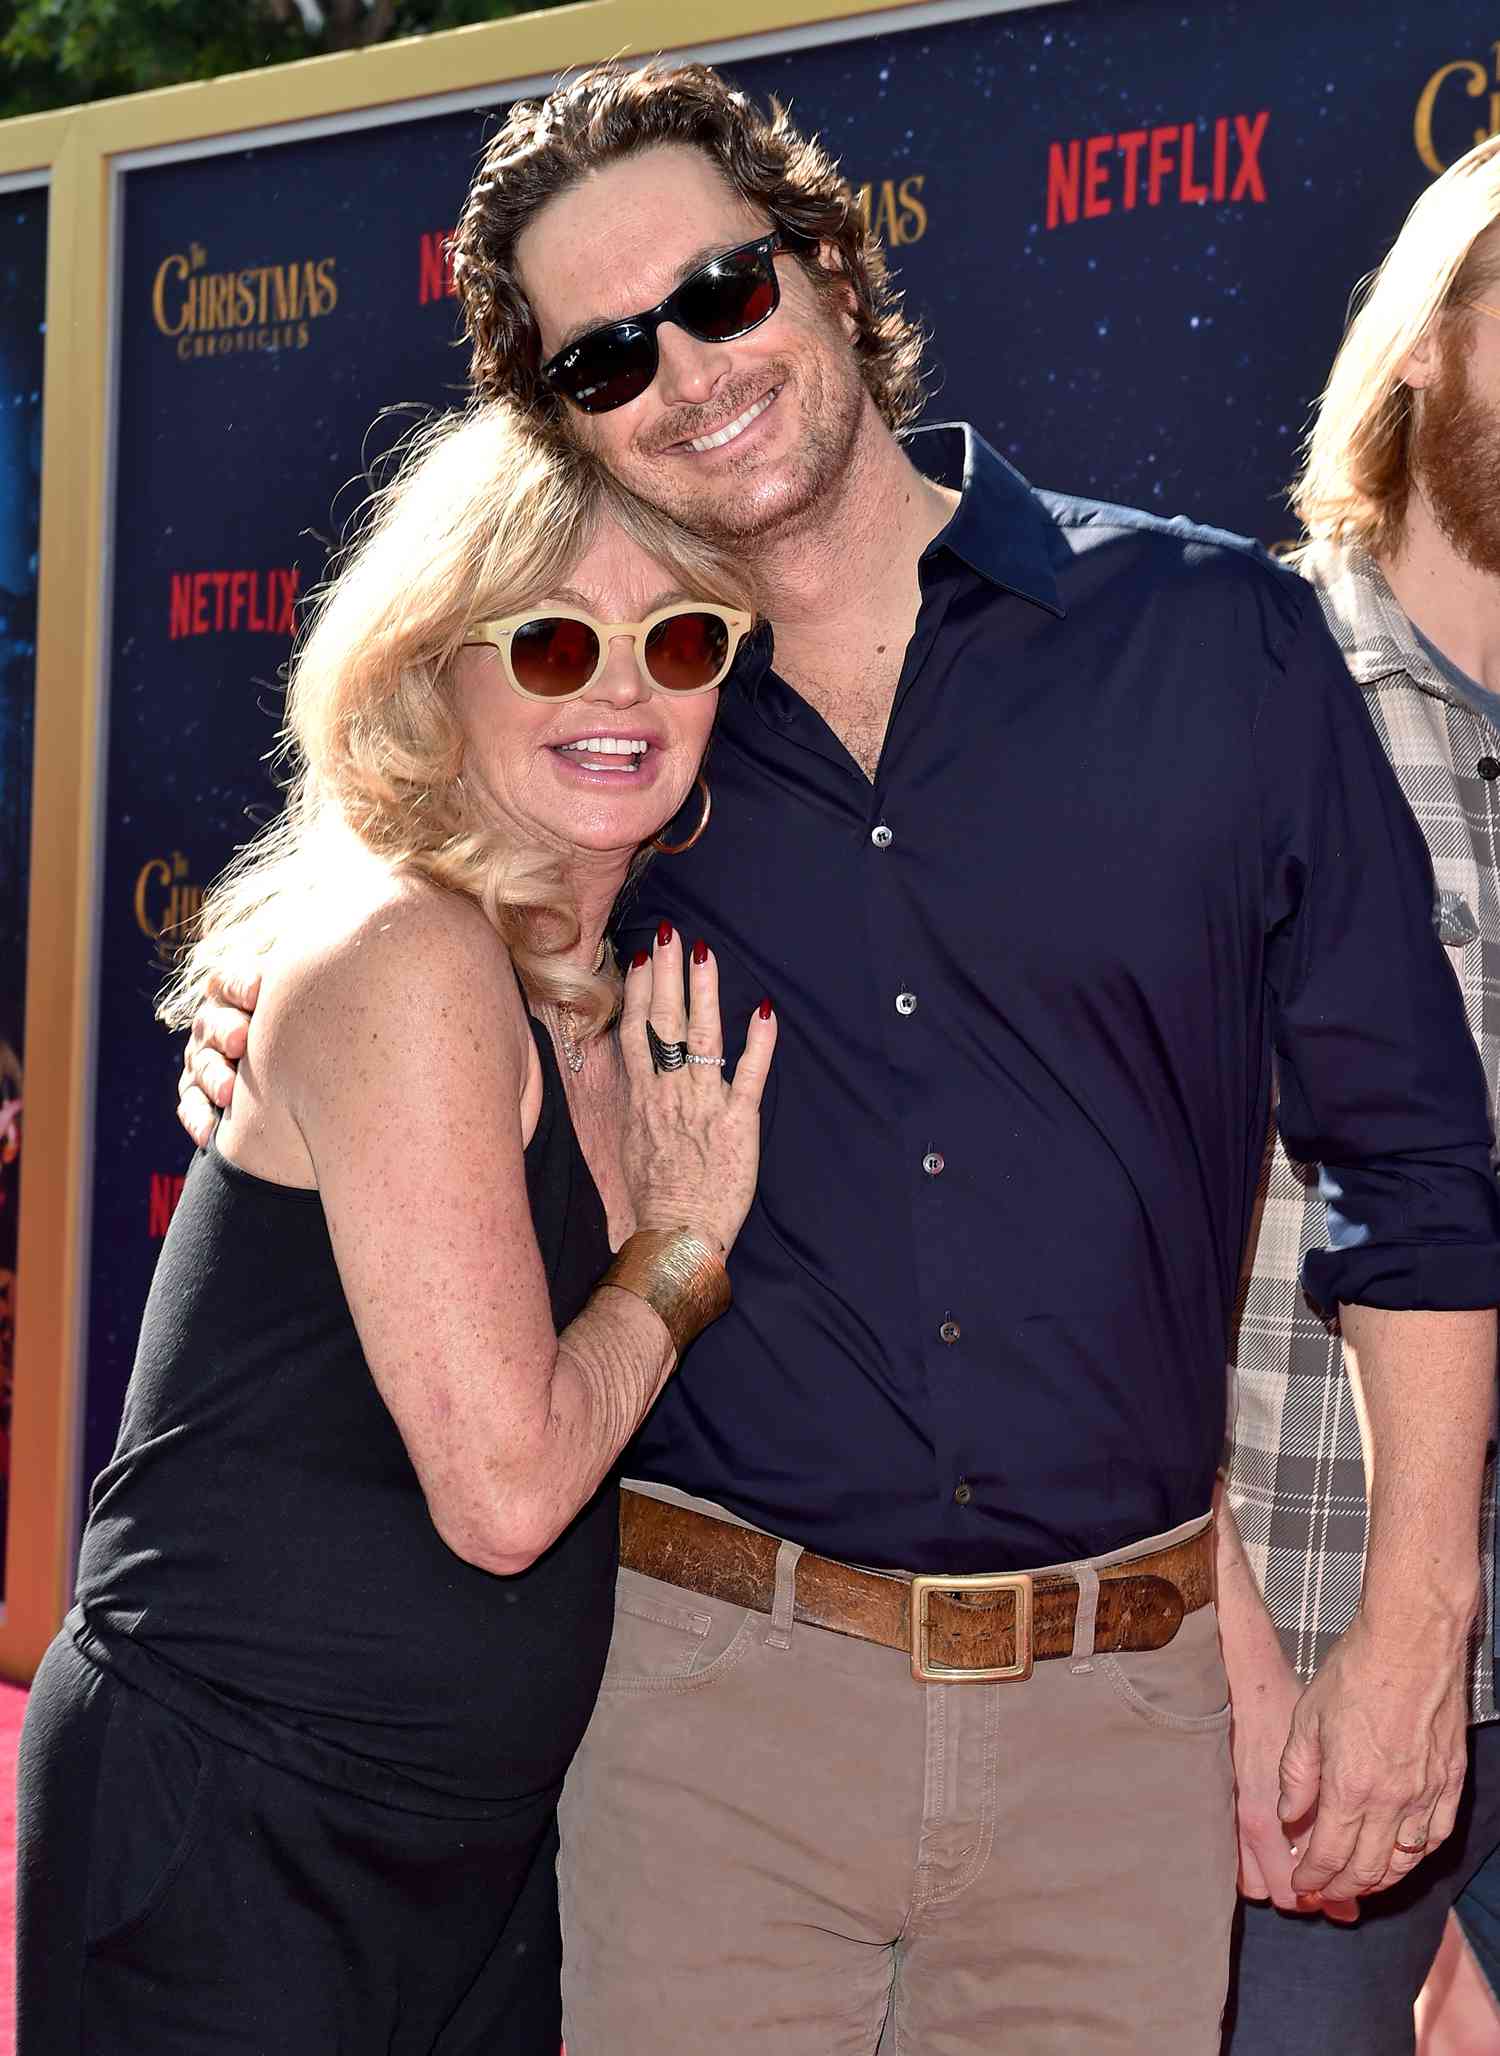 Goldie Hawn and Oliver Hudson attend the premiere of Netflix's 'The Christmas Chronicles' at Fox Bruin Theater on November 18, 2018 in Los Angeles, California